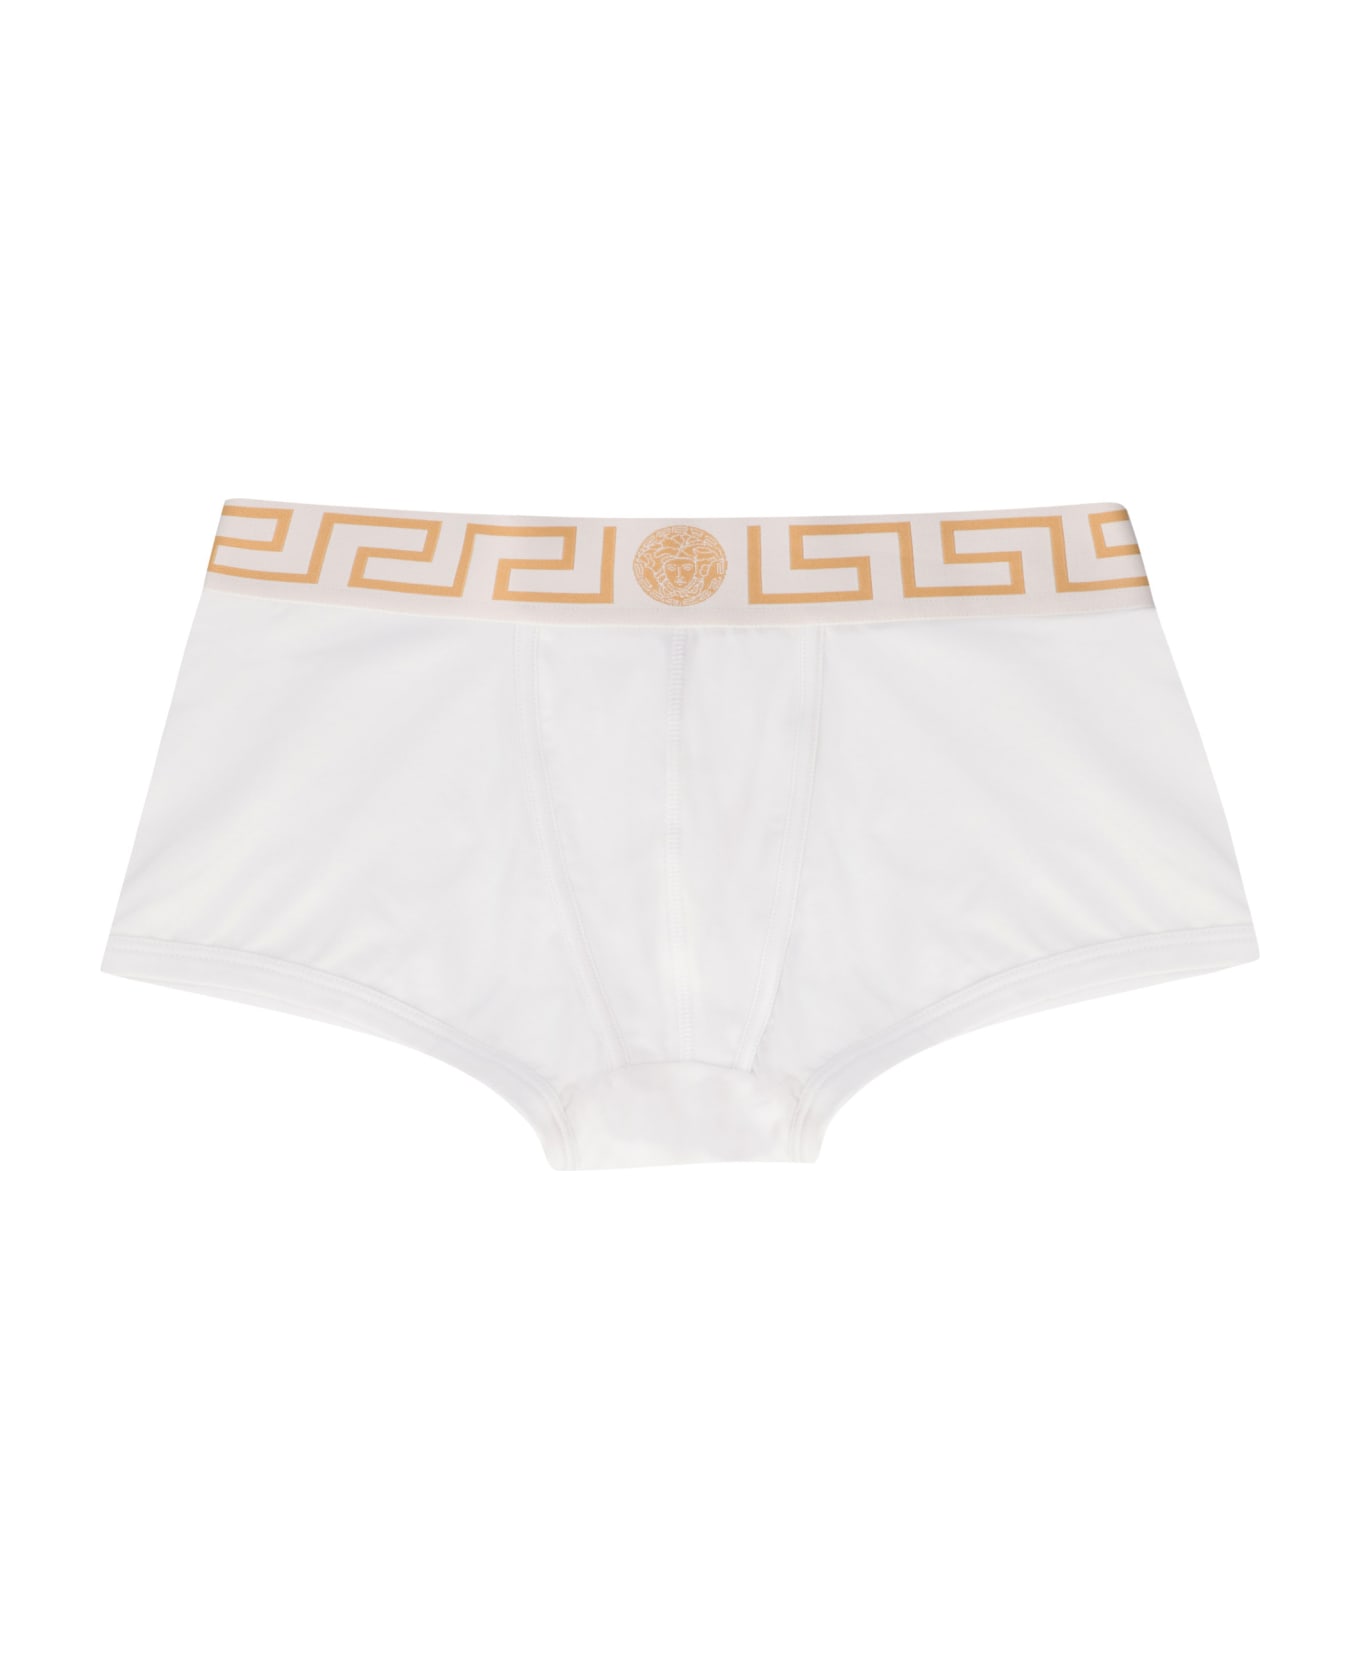 Versace Fine Cotton Trunks With Elastic Band - WHITE ショーツ